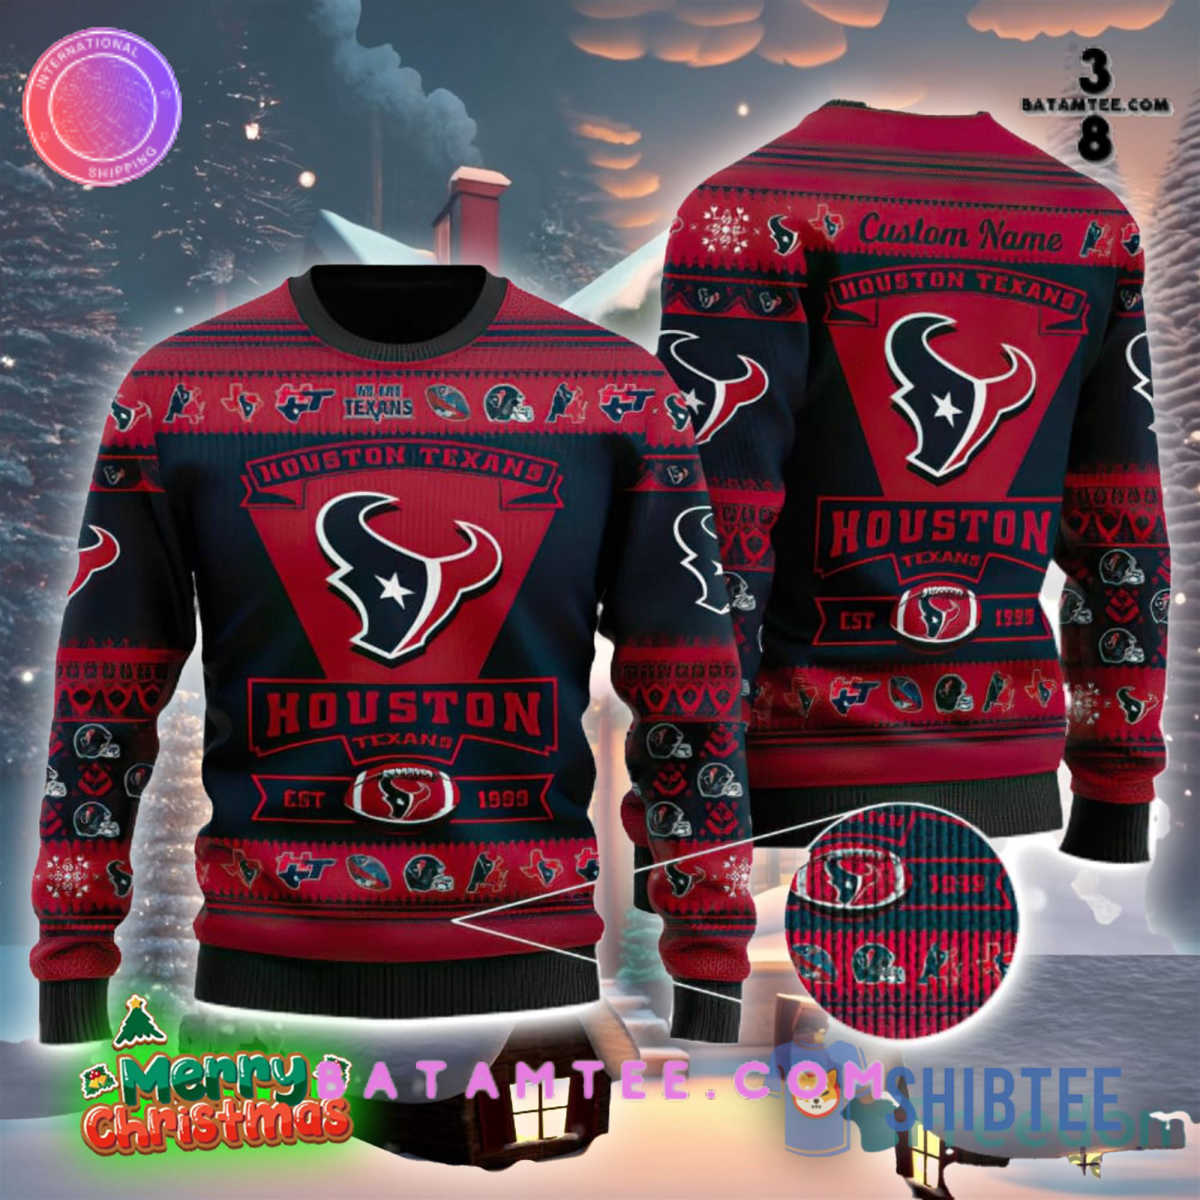 Houston Texans Logo Custom Name For Football Fans Ugly Christmas Sweater Christmas Gift's Overview - Batamtee Shop - Threads & Totes: Your Style Destination